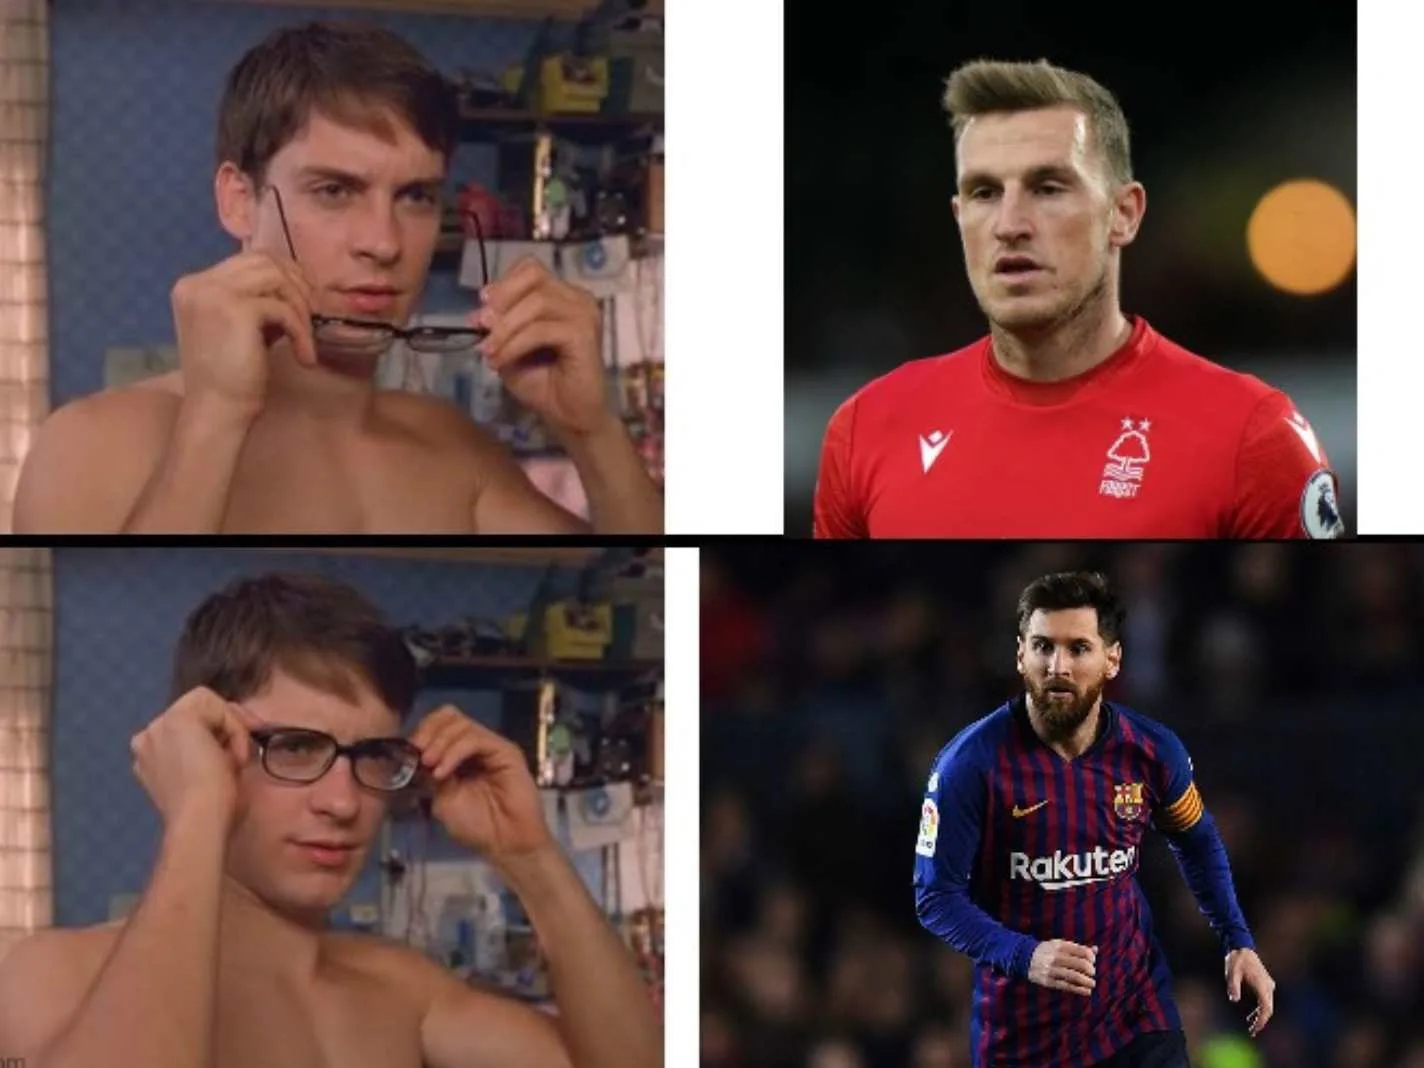 Meme comparing Chris Wood with Lionel Messi after his Hattrick against Newcastle United